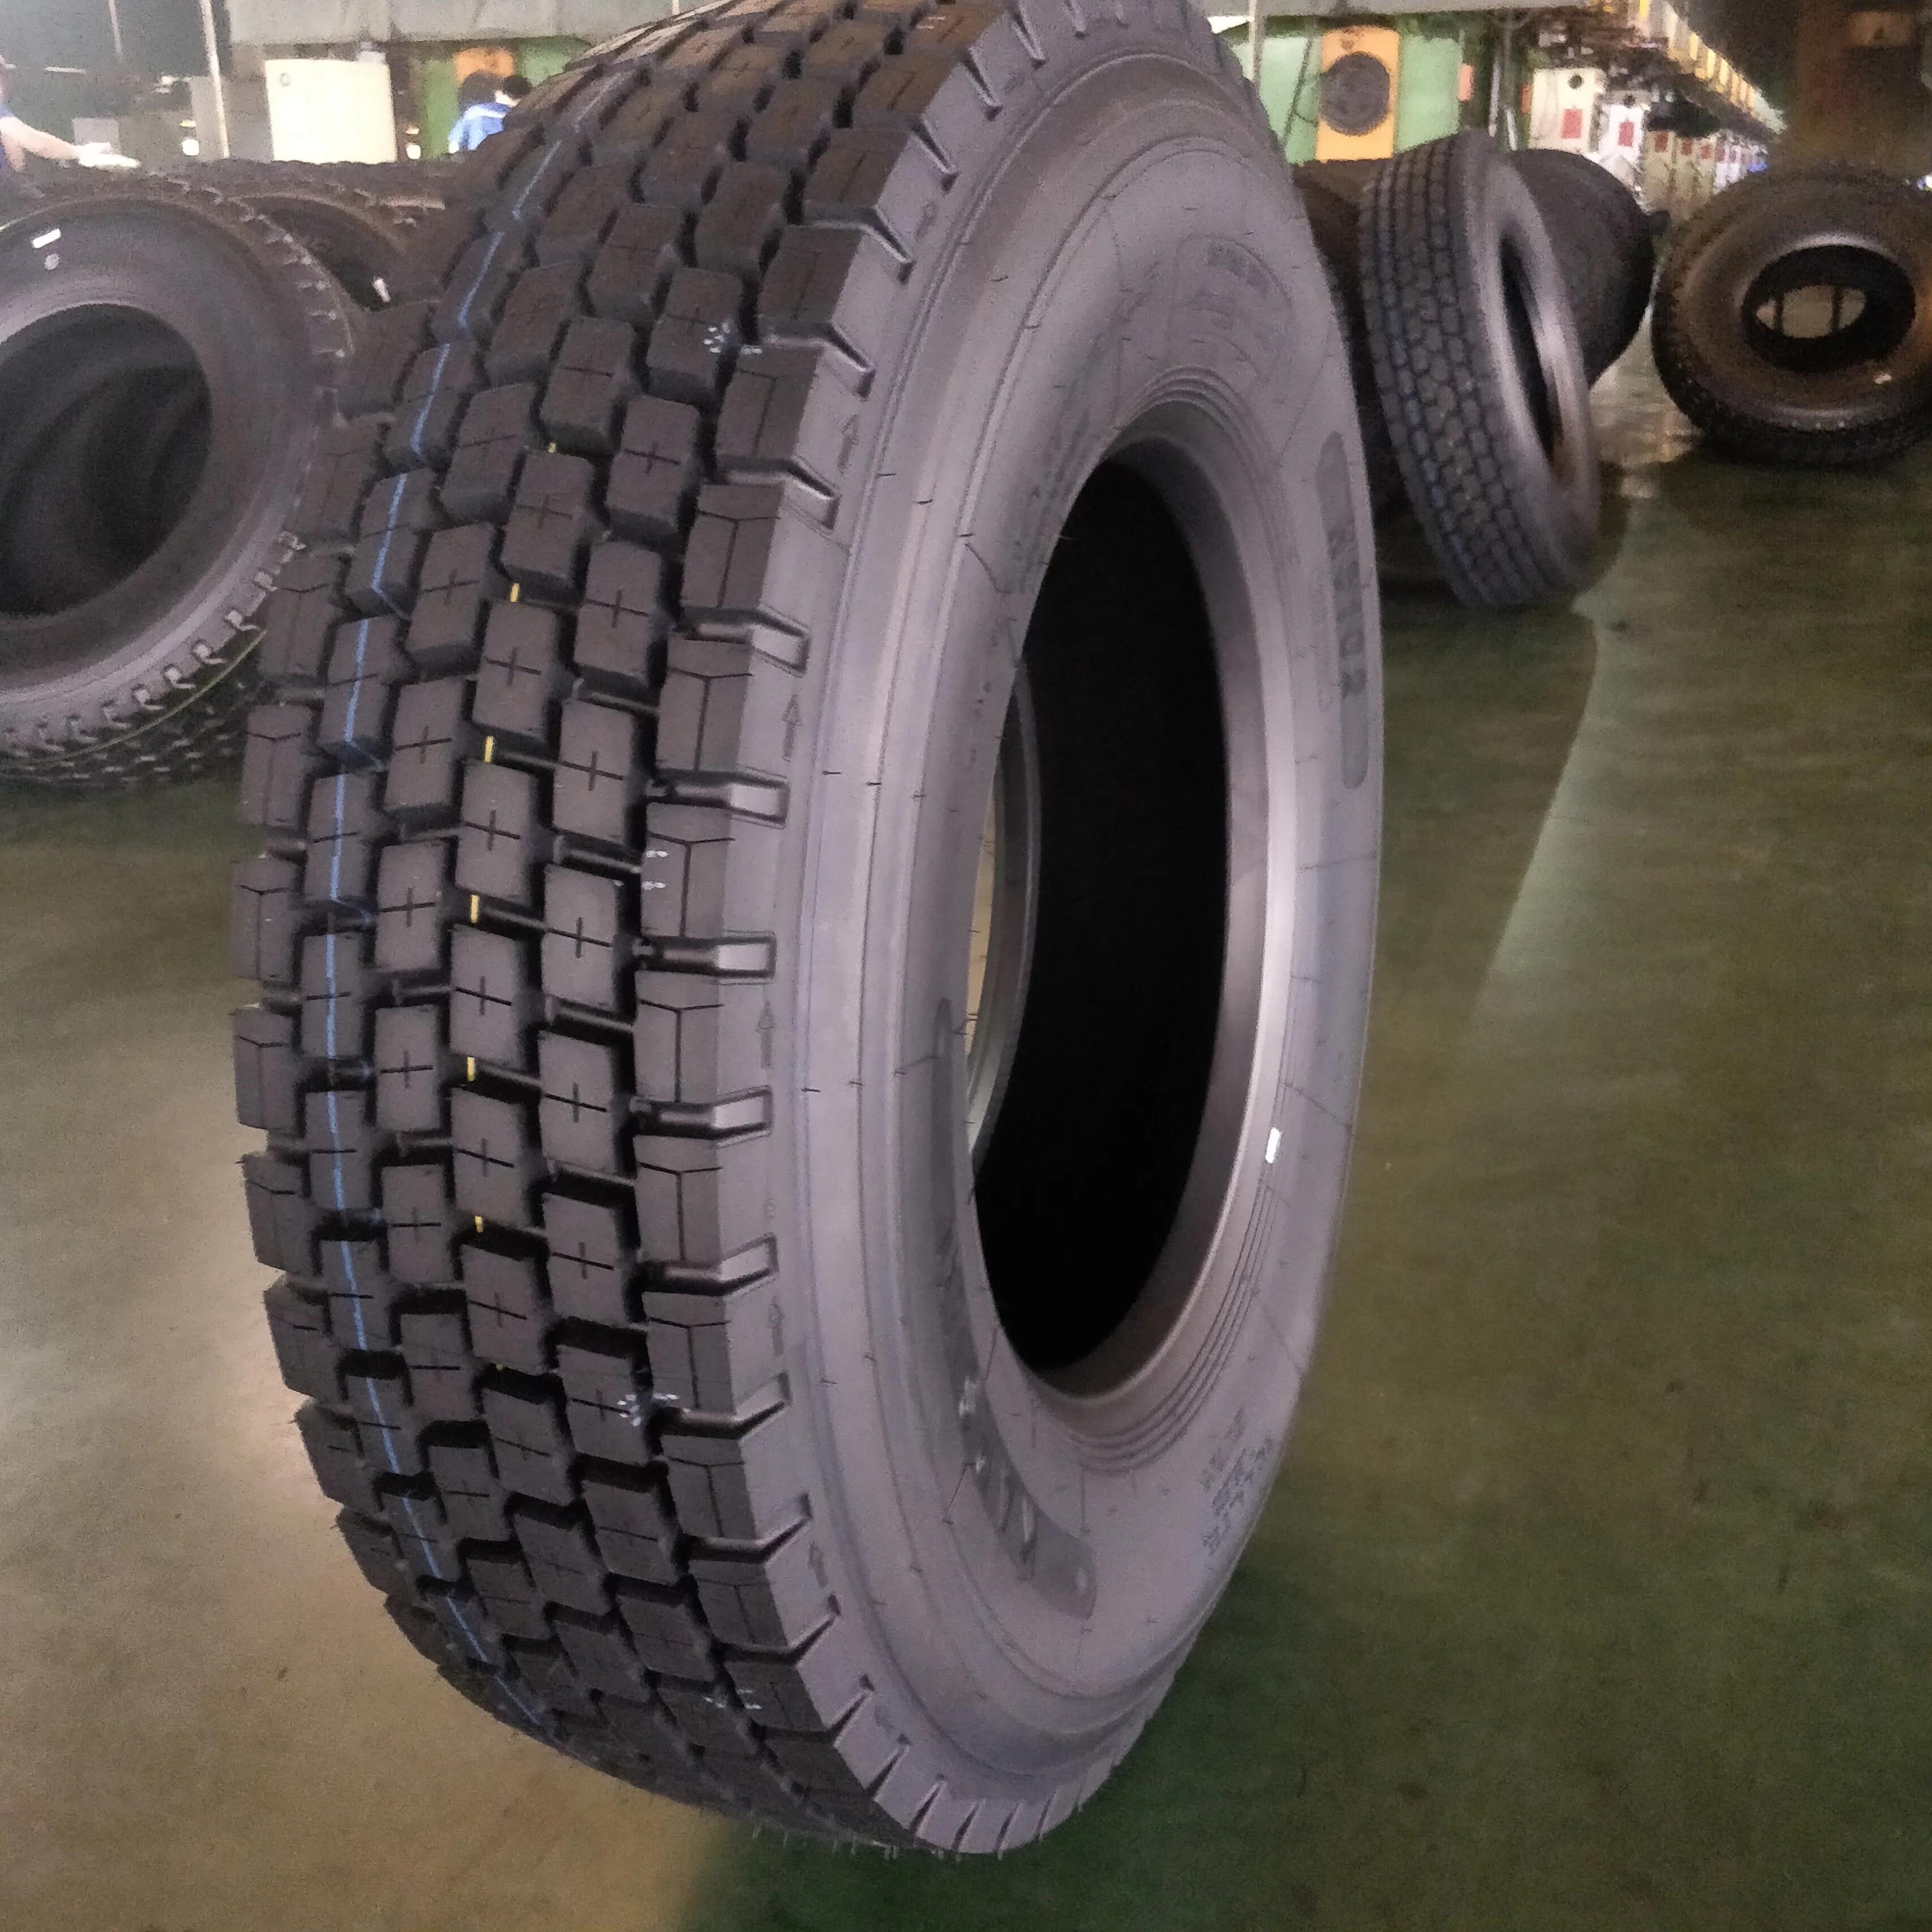 Manufactures in china 11R22.5 11R24.5 315/80R22.5 295/80R22.5 tyres wholesale truck tires 315/80R22.5